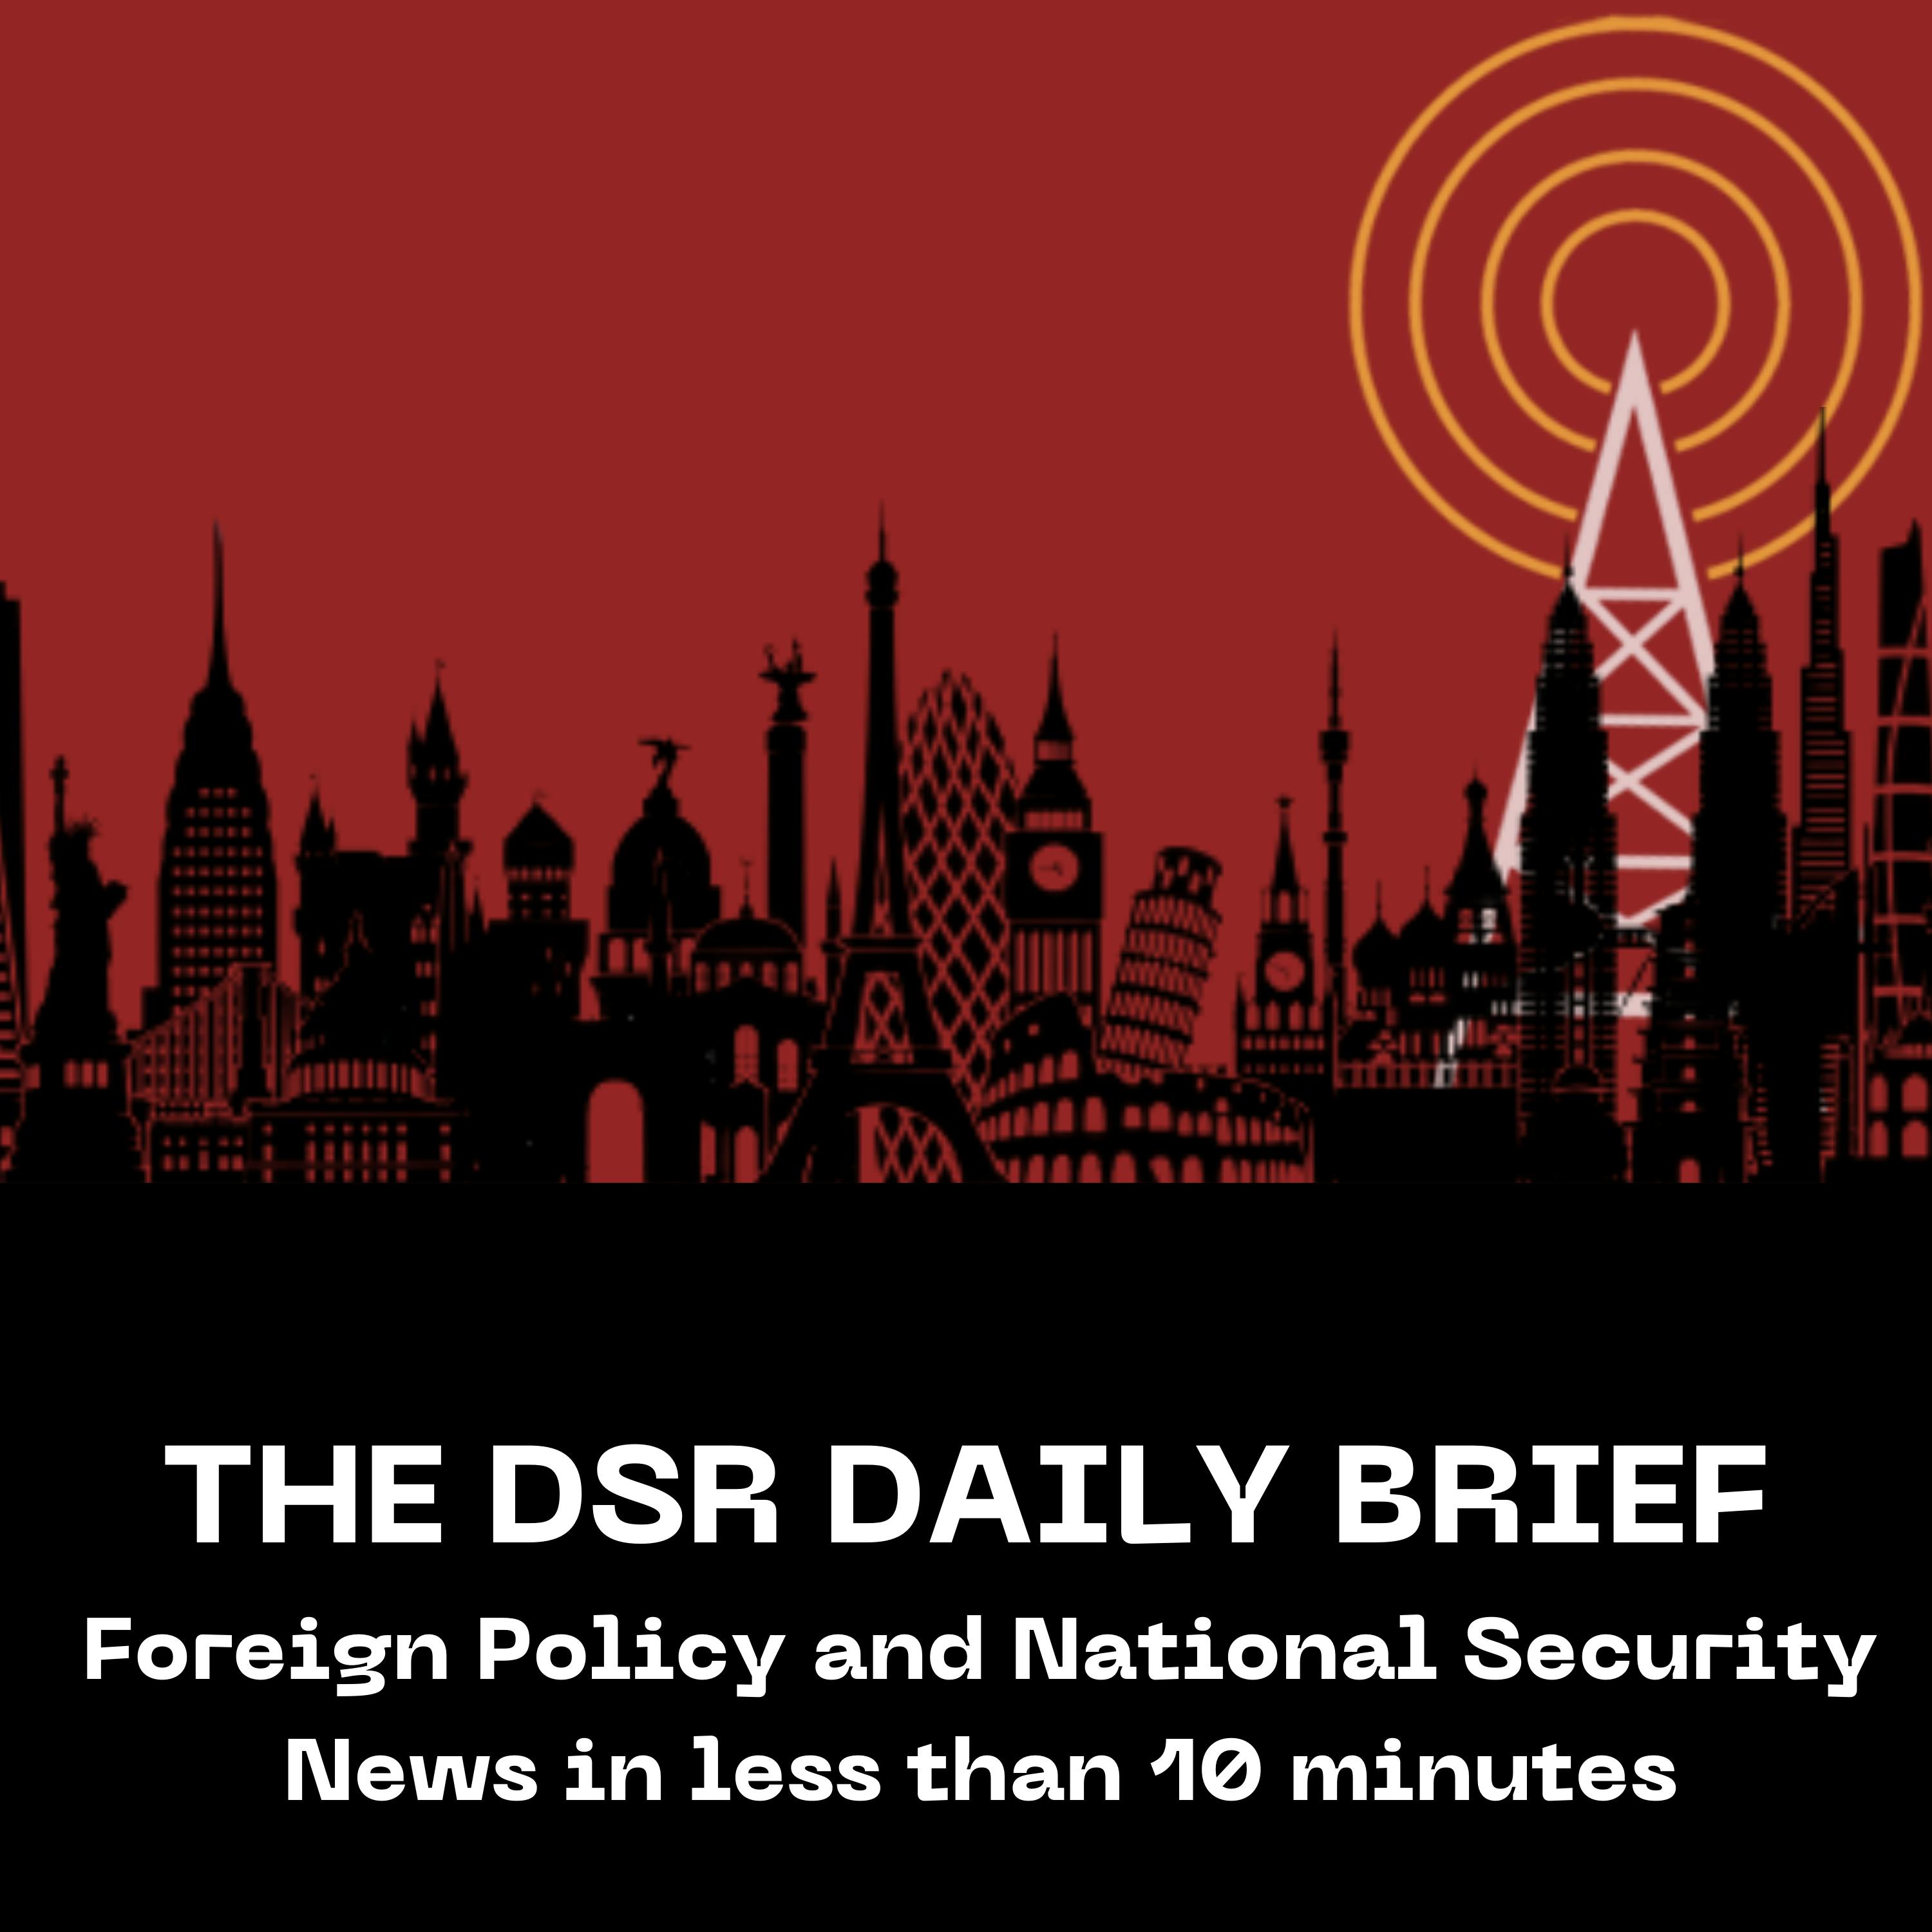 The DSR Daily for November 21: Ukraine Celebrates 10th Anniversary of Euromaidan, Israel and Hamas Approaching Agreement in Gaza